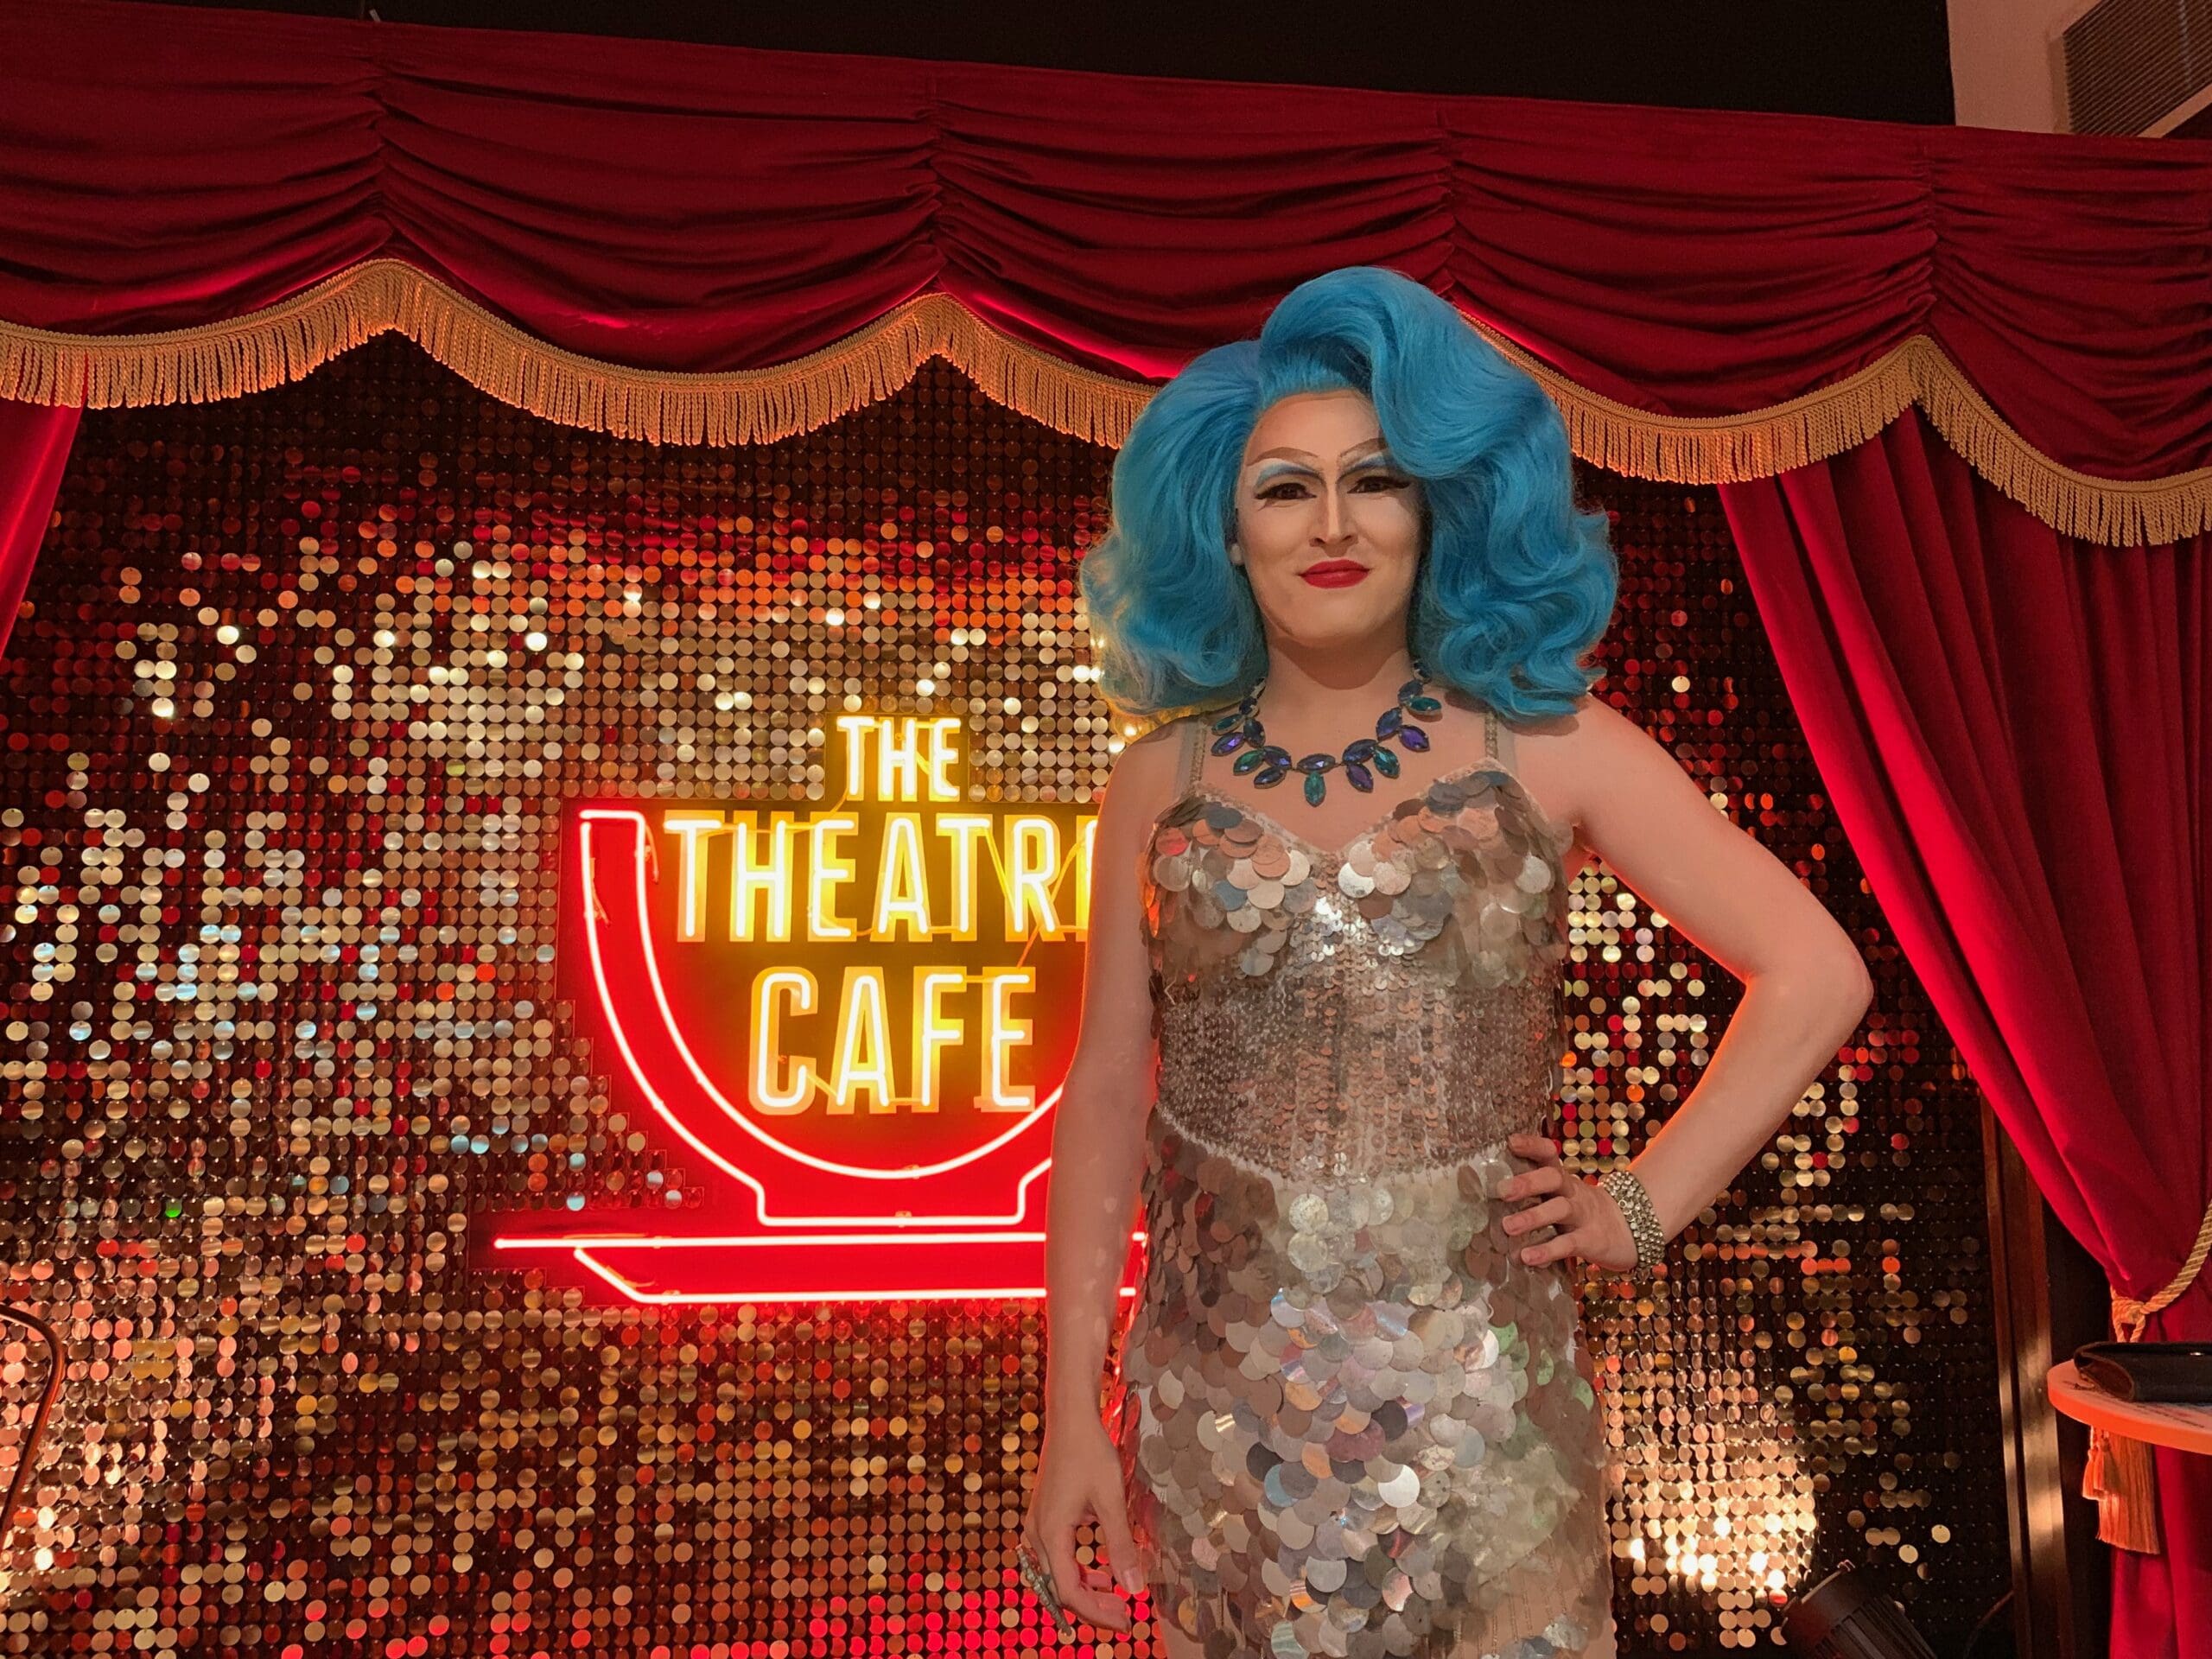 jade justine at the theatre cafe